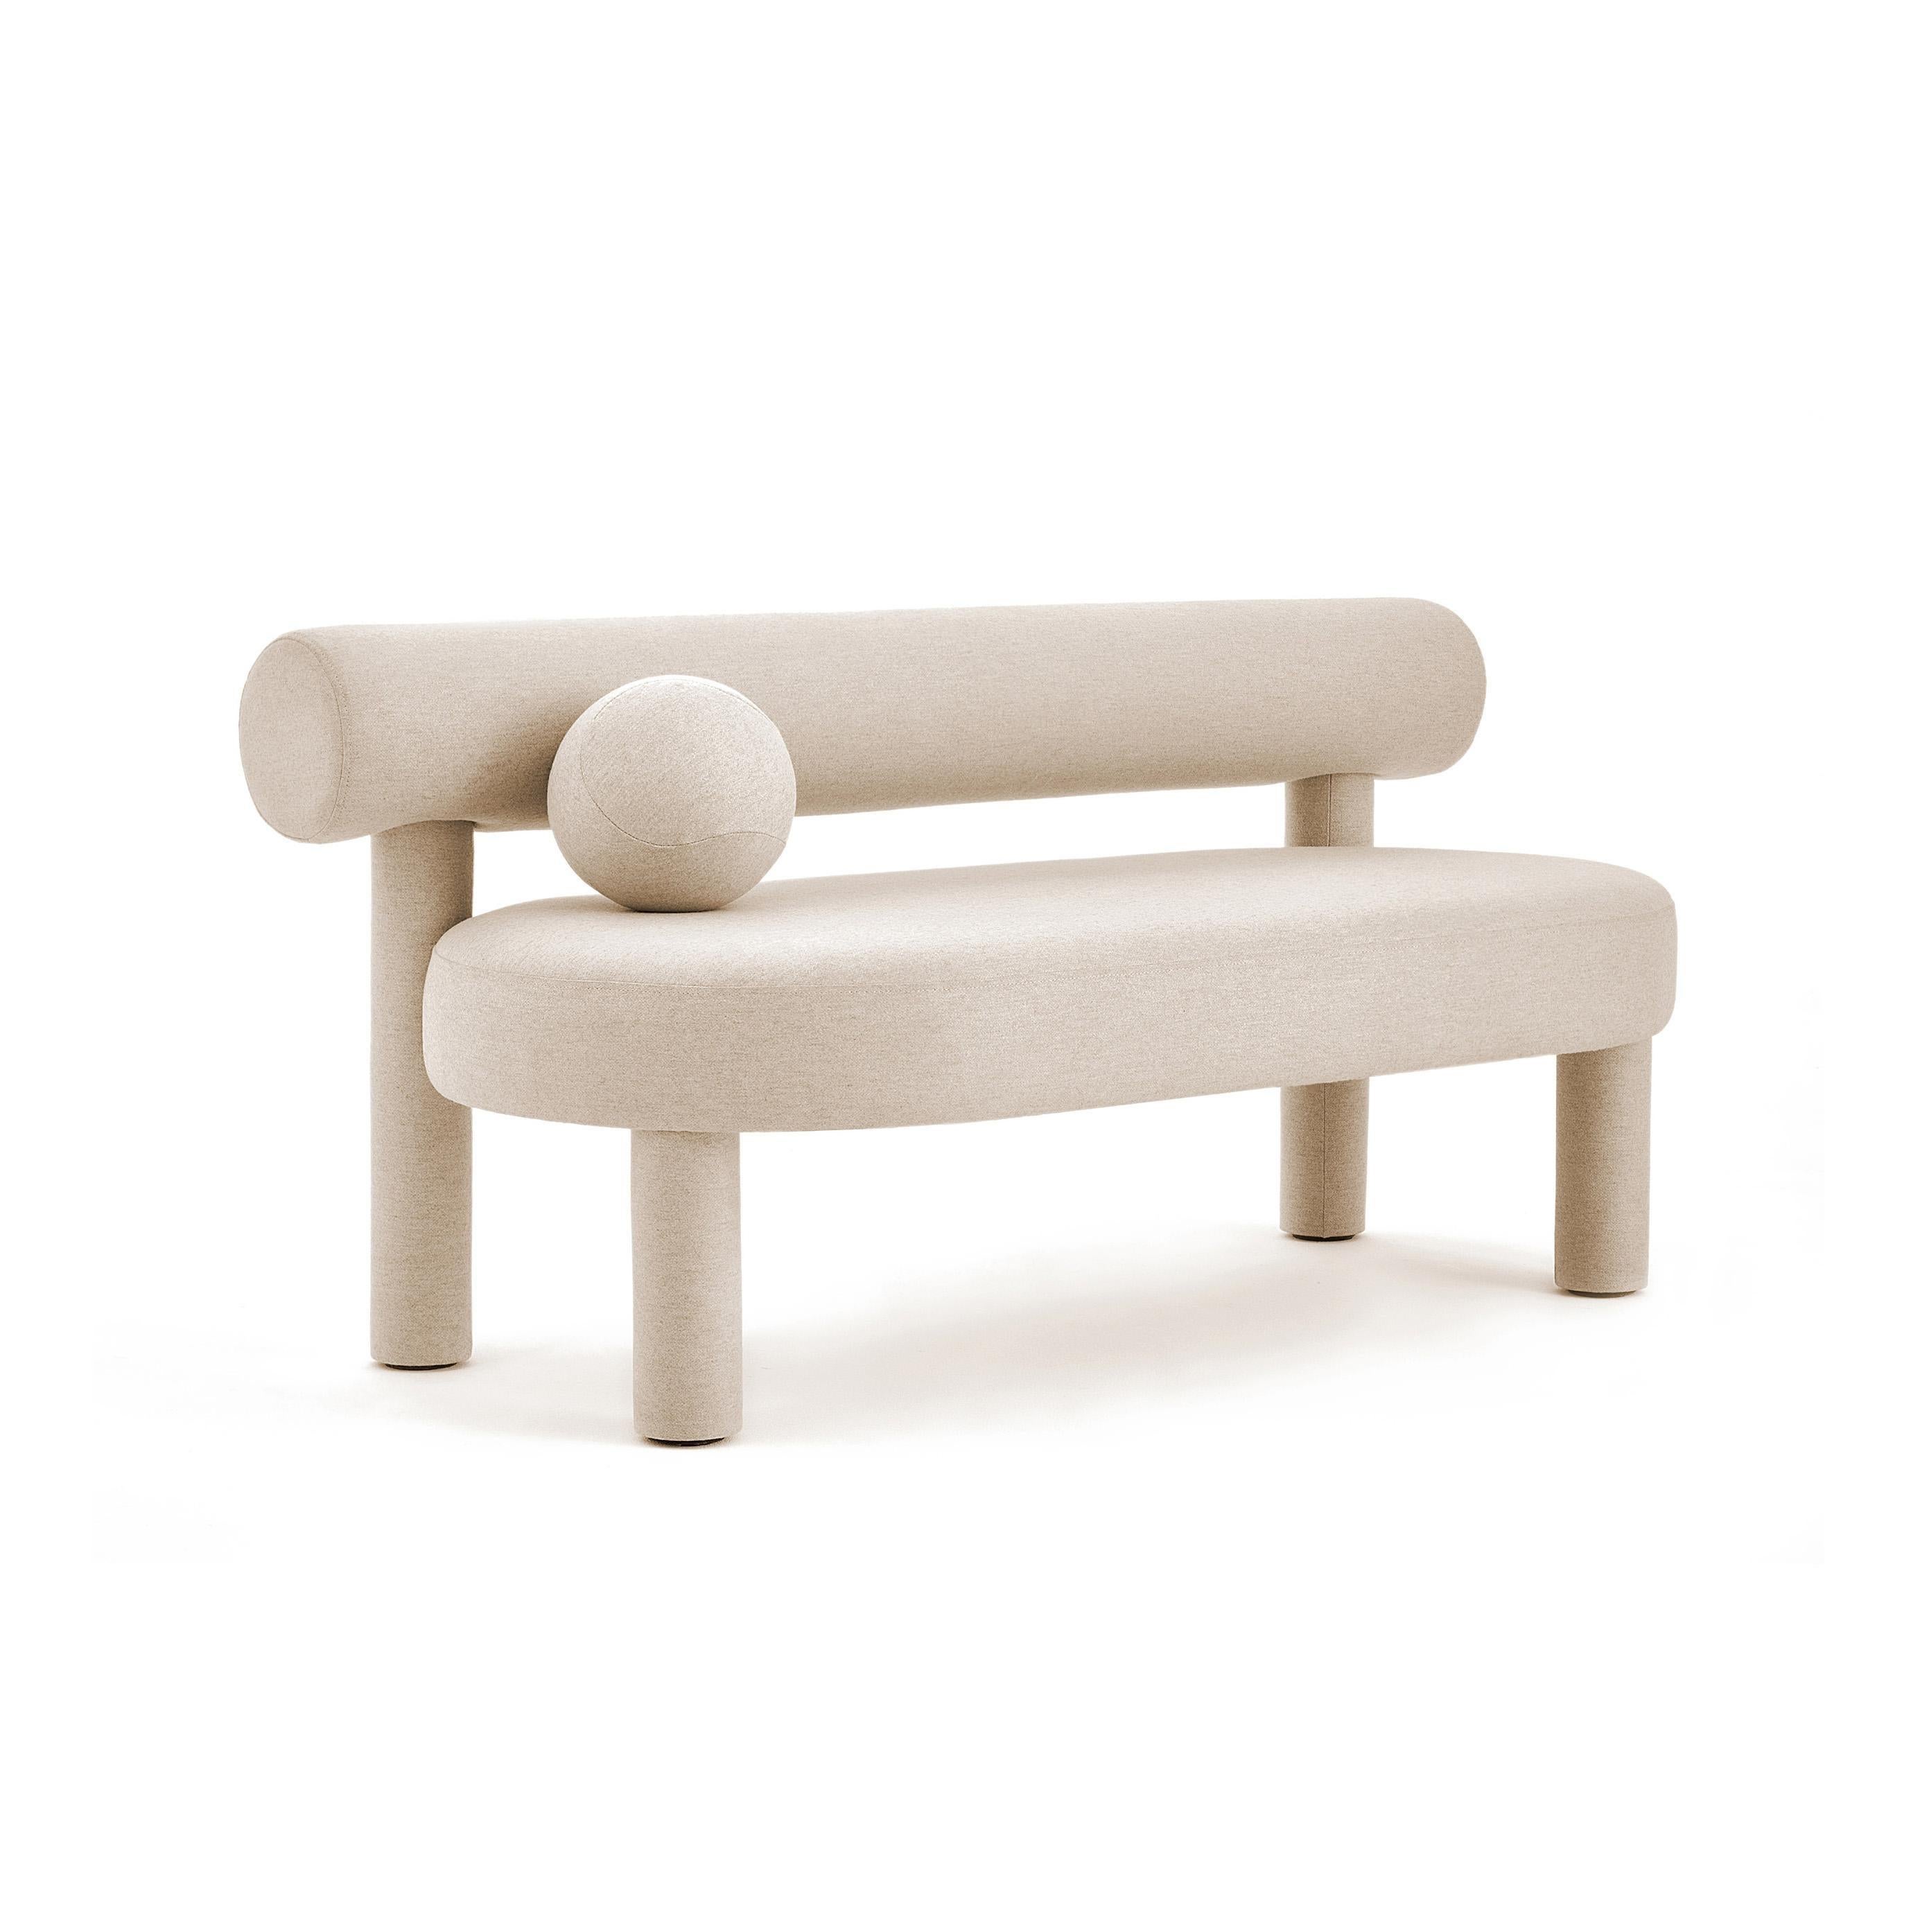 Sofa Gropius CS1 by Noom 
Designer: Kateryna Sokolova
Dimensions: H 71 cm x W 150 cm x D 70 cm, Seat height: 44 cm.

Materials: textile, polyurethane foam, wood, plywood
Fabrics: Available in a wide range of colors and fabrics by request.

New NOOM